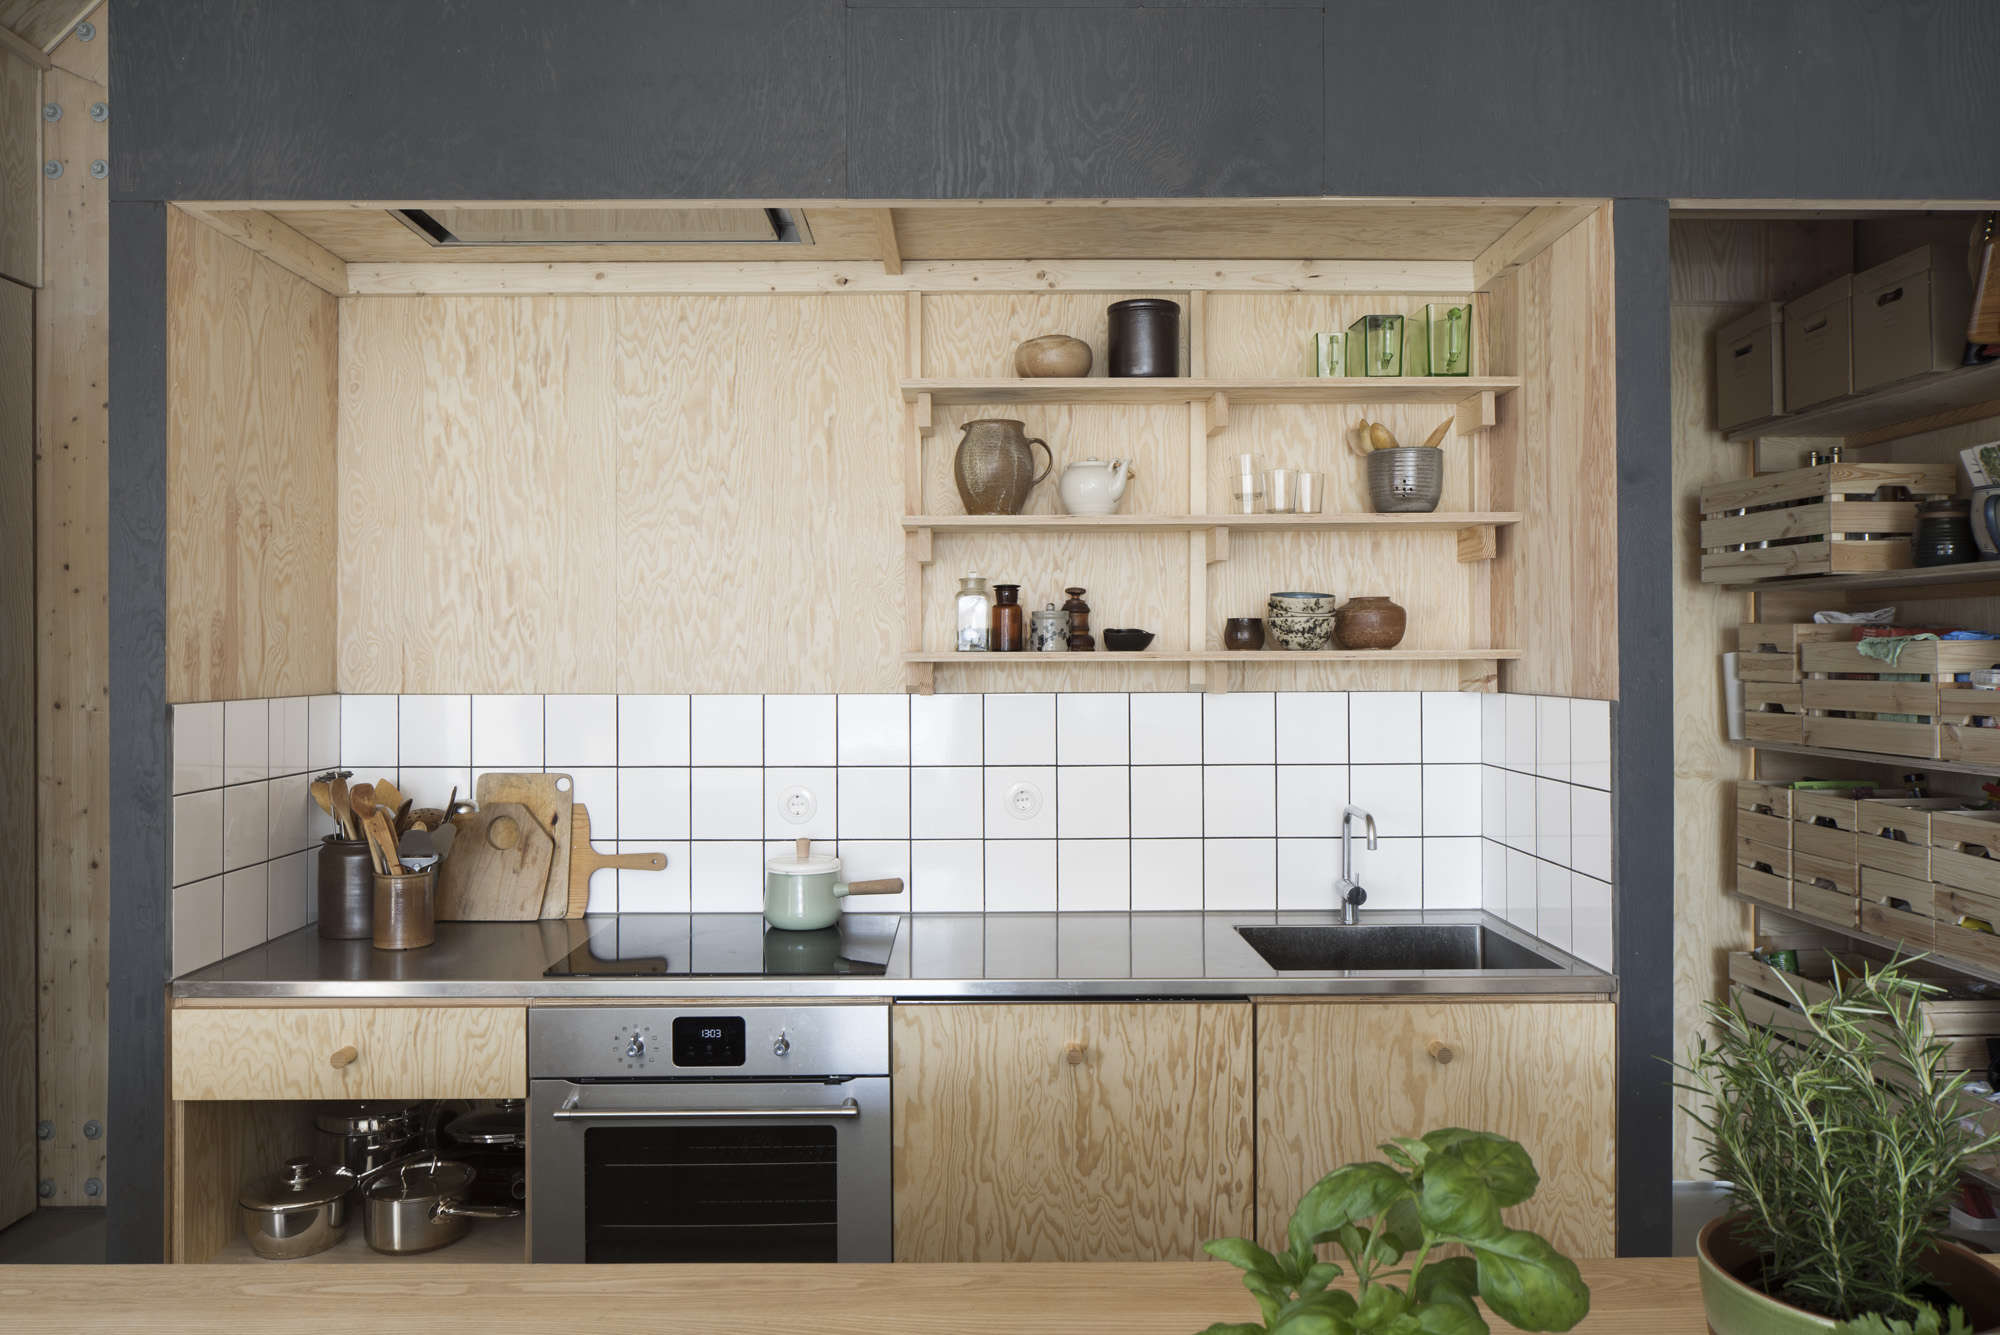 32 Easy And Cheap Ways To Make The Most Out Of A Small Kitchen Space -  thelatestdailynews